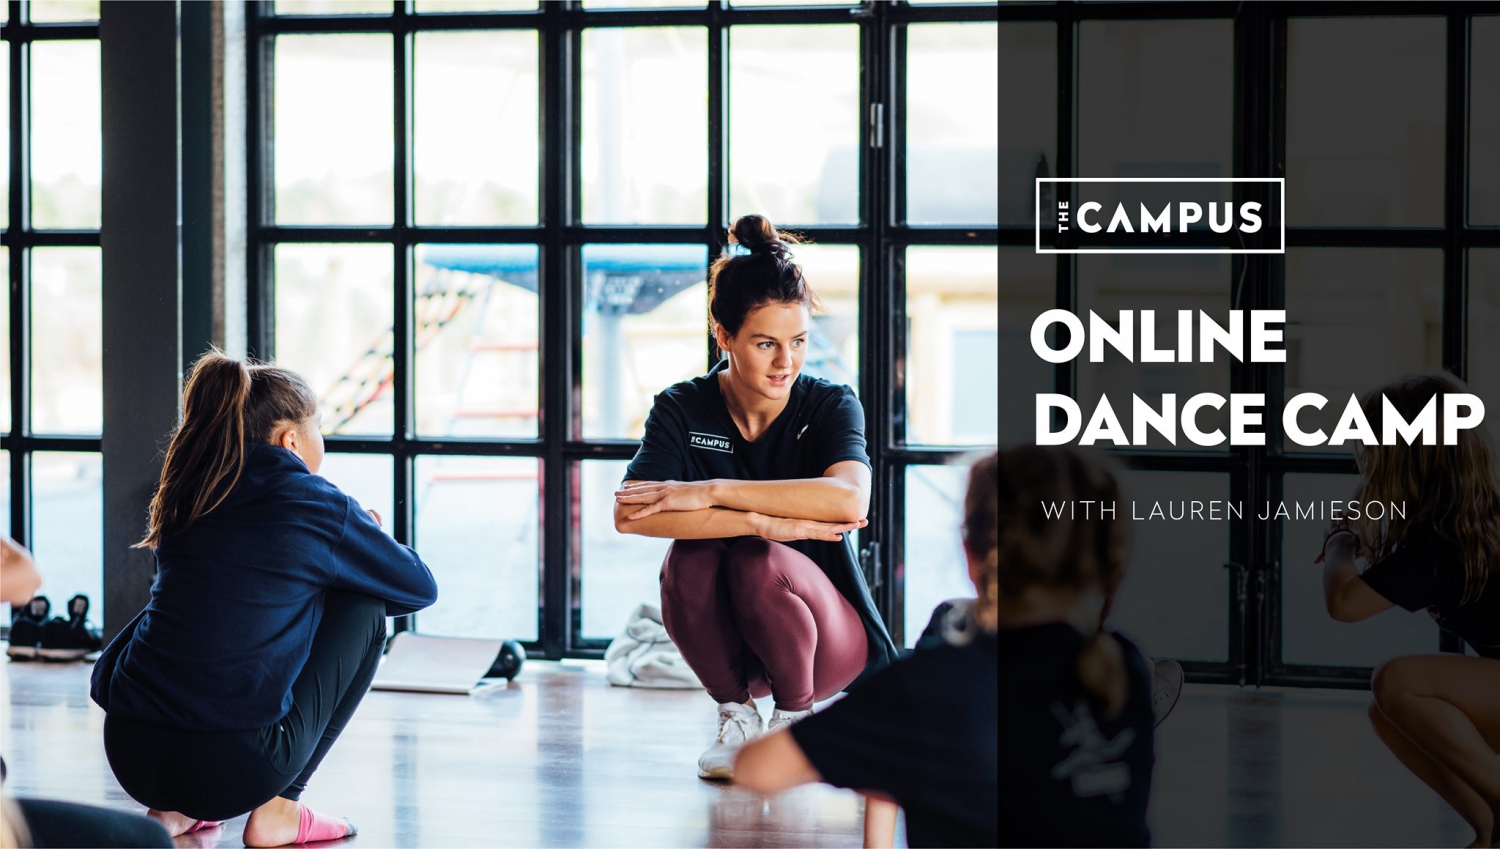 Online Dance Camp with Lauren Jamieson by The Campus